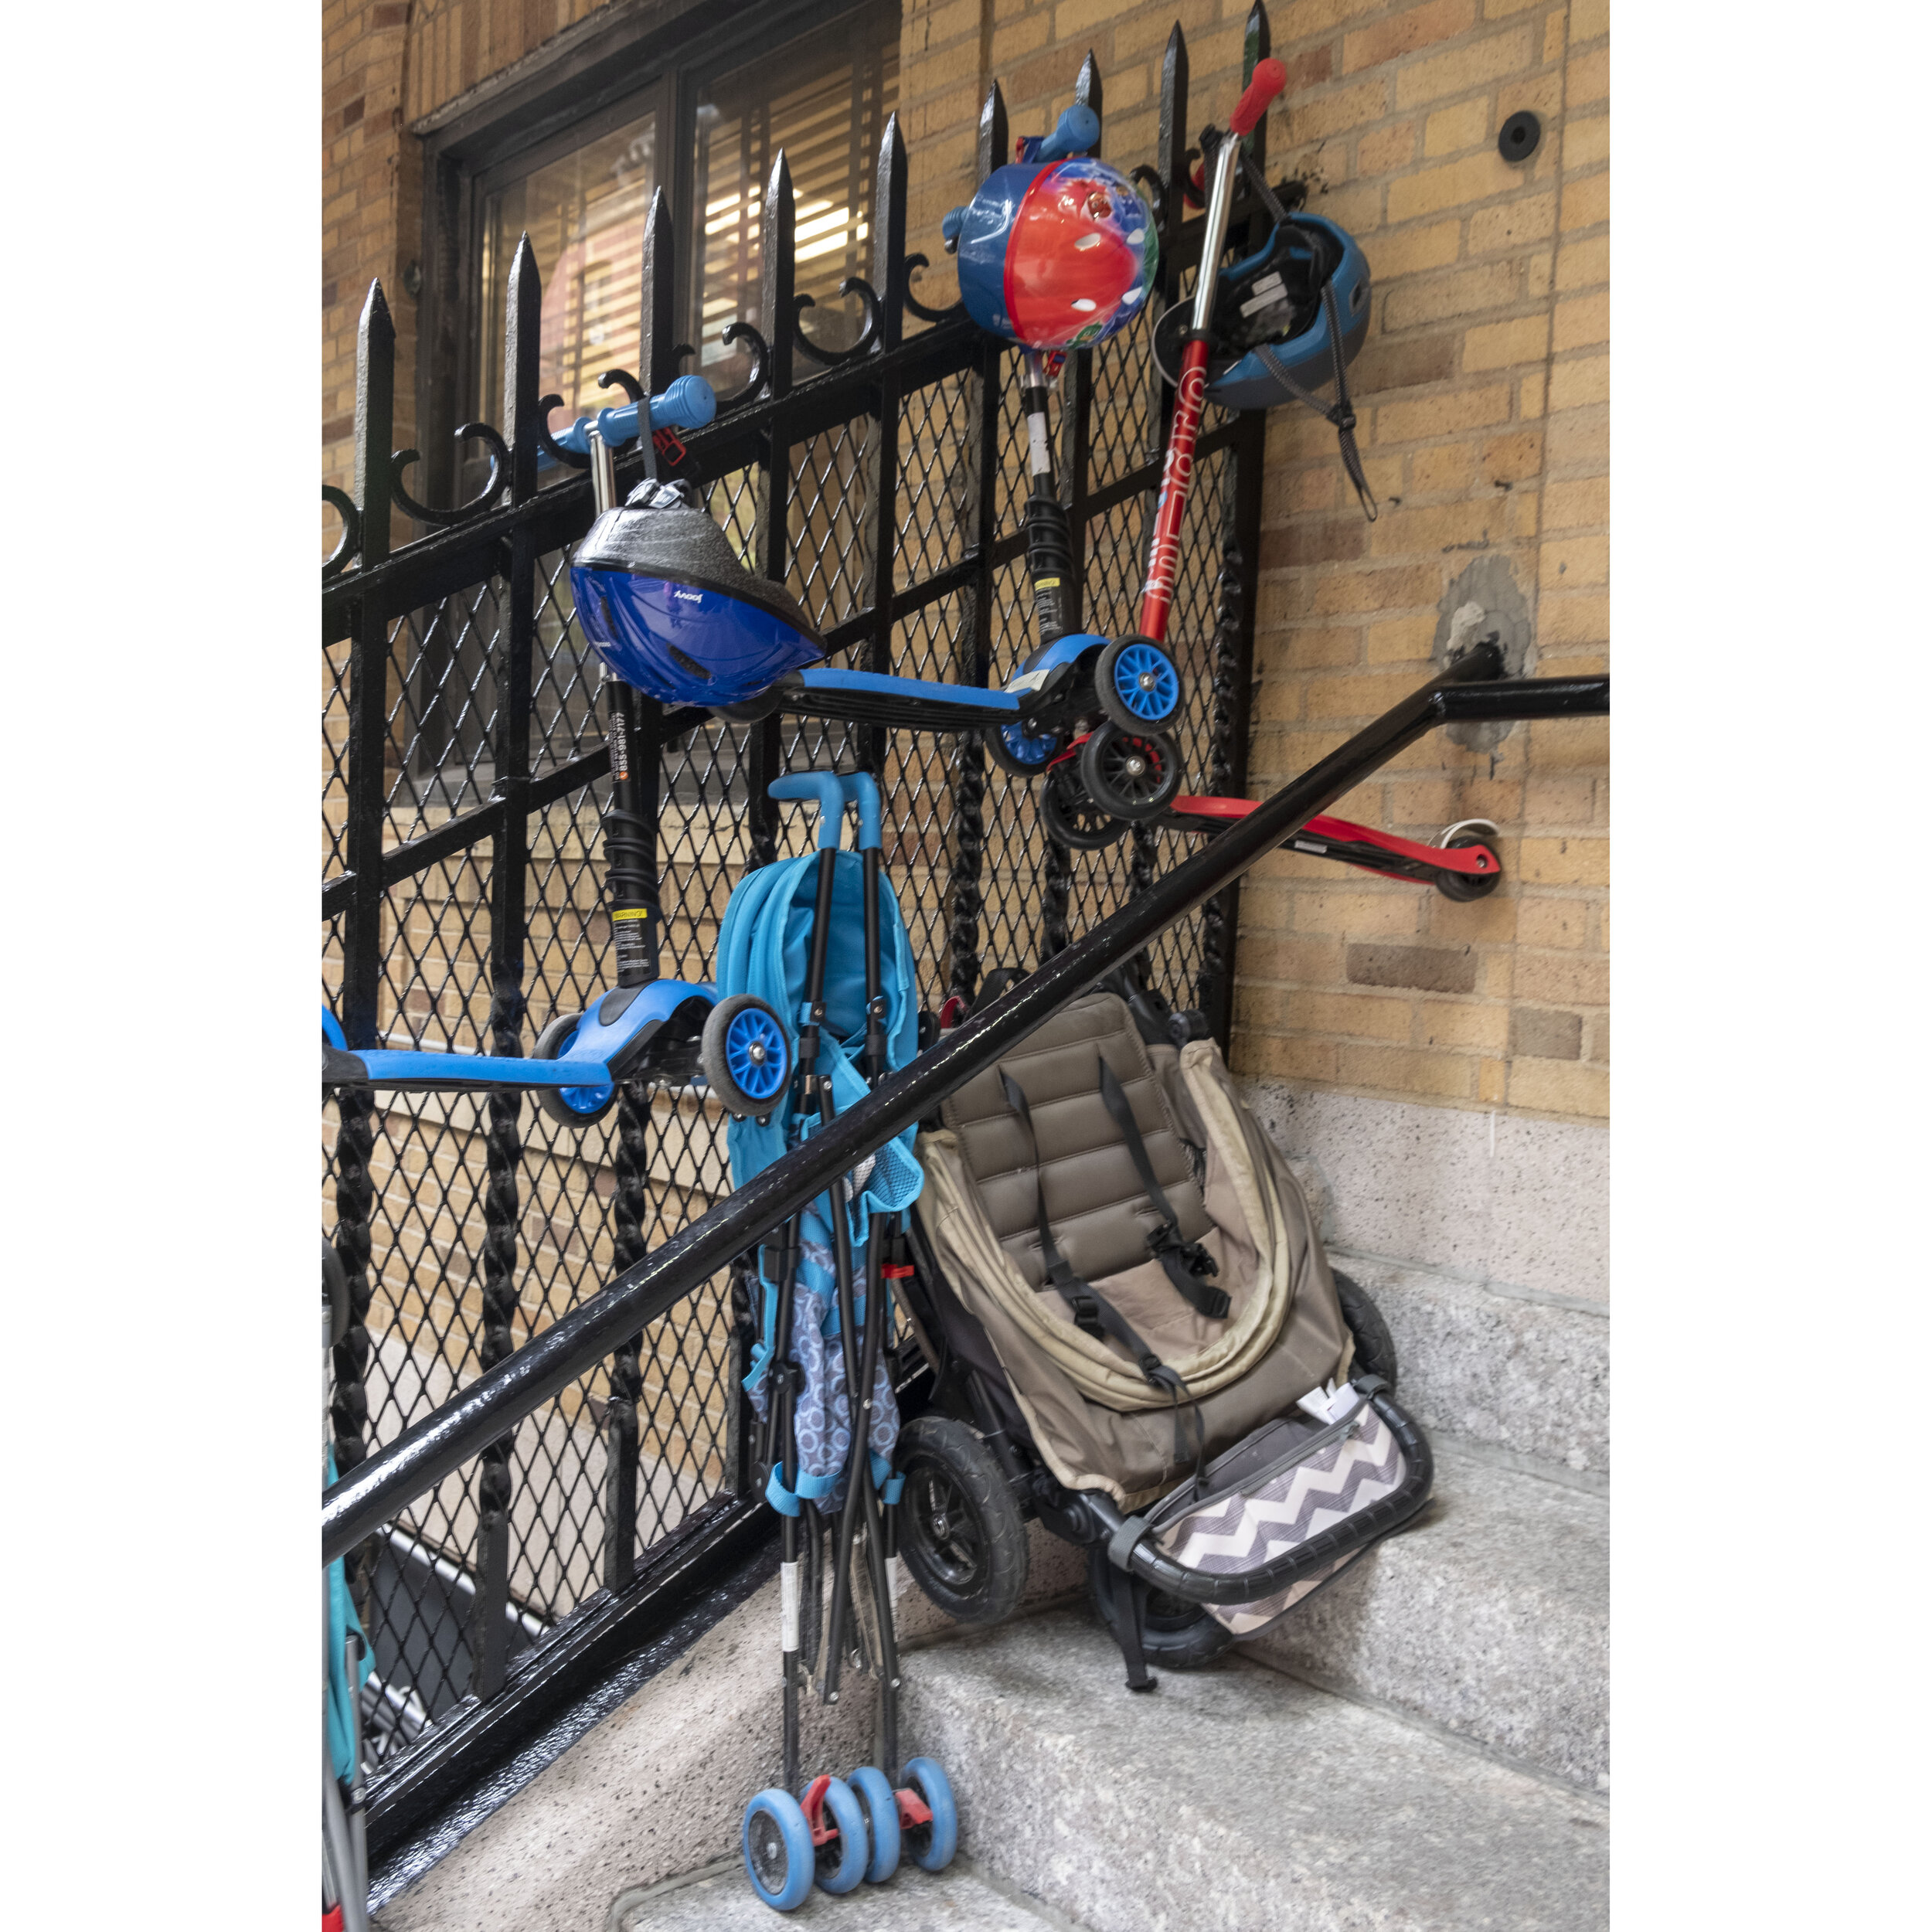 hanging scooters and stroller.jpg